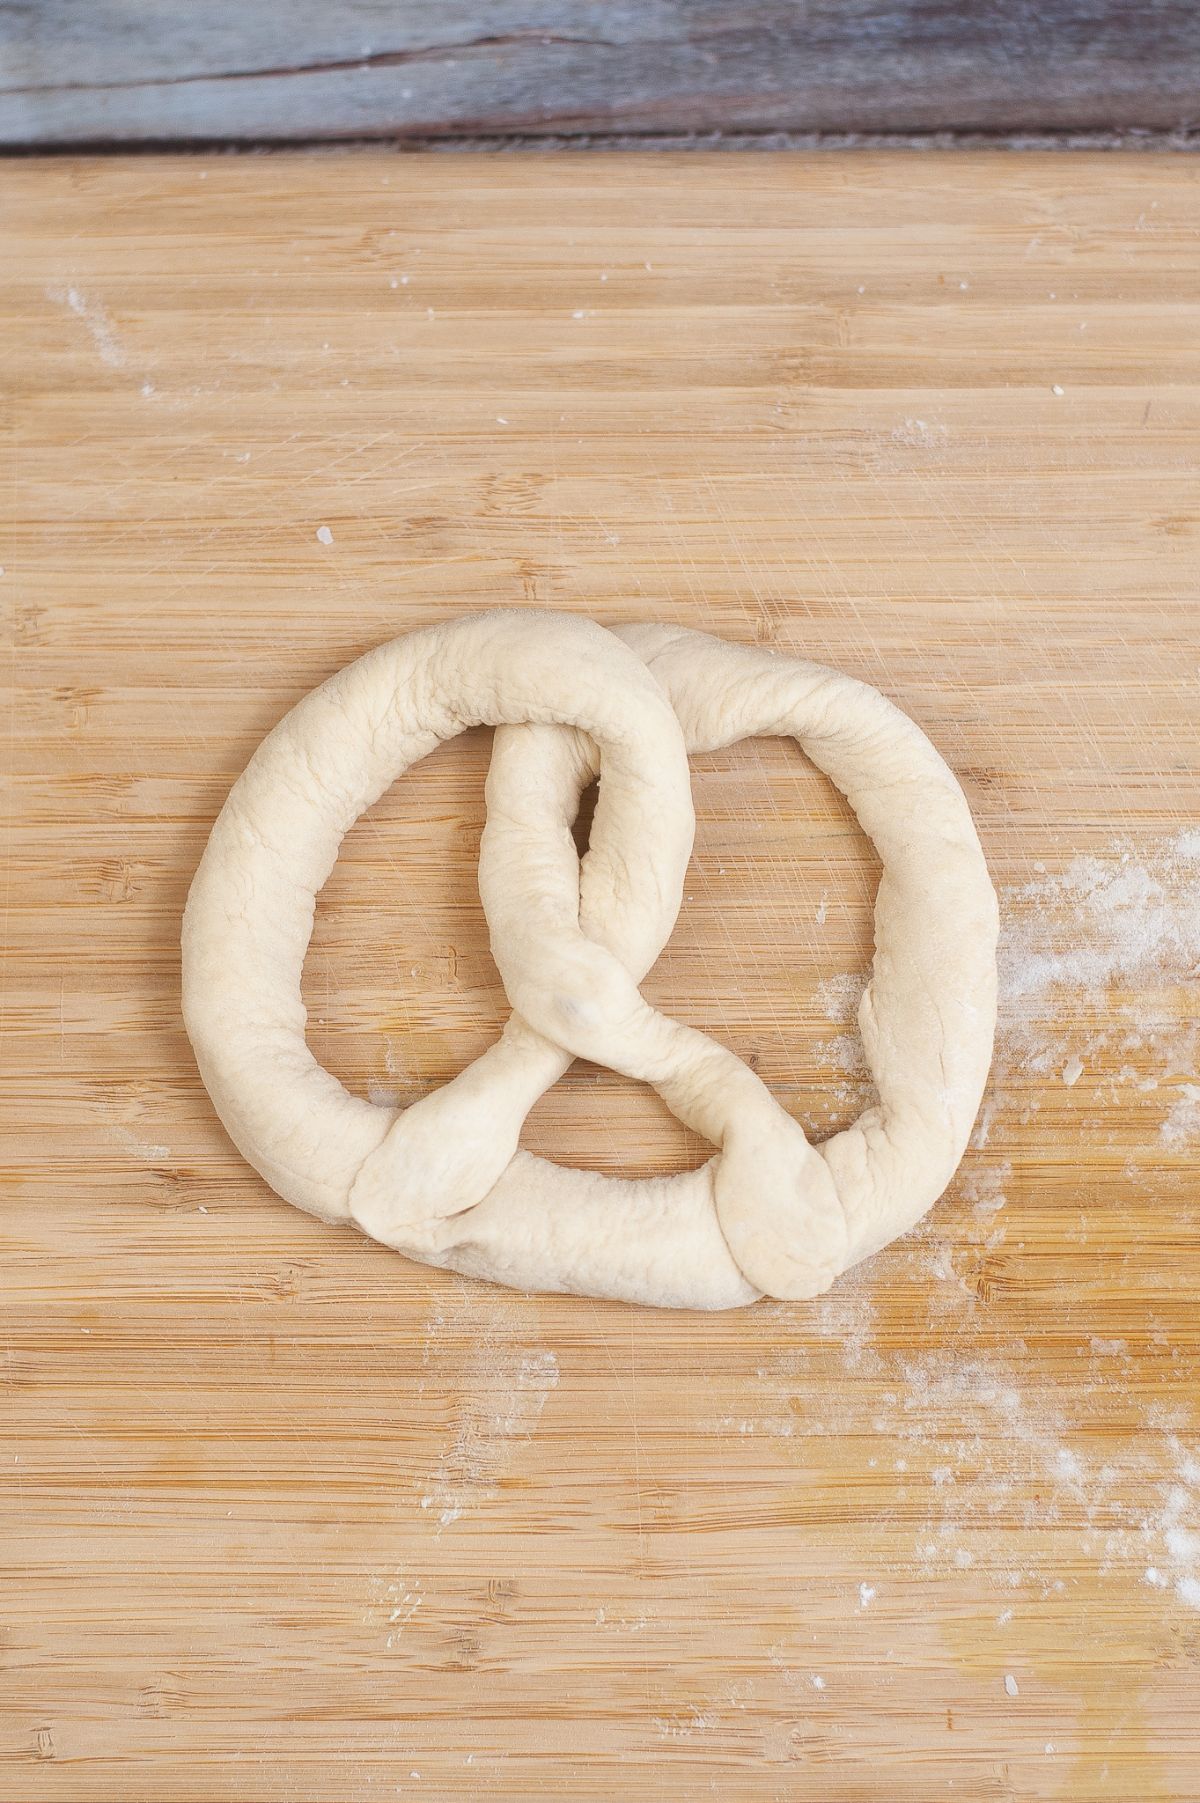 Twisted pretzel dough on the wooden chopping board.